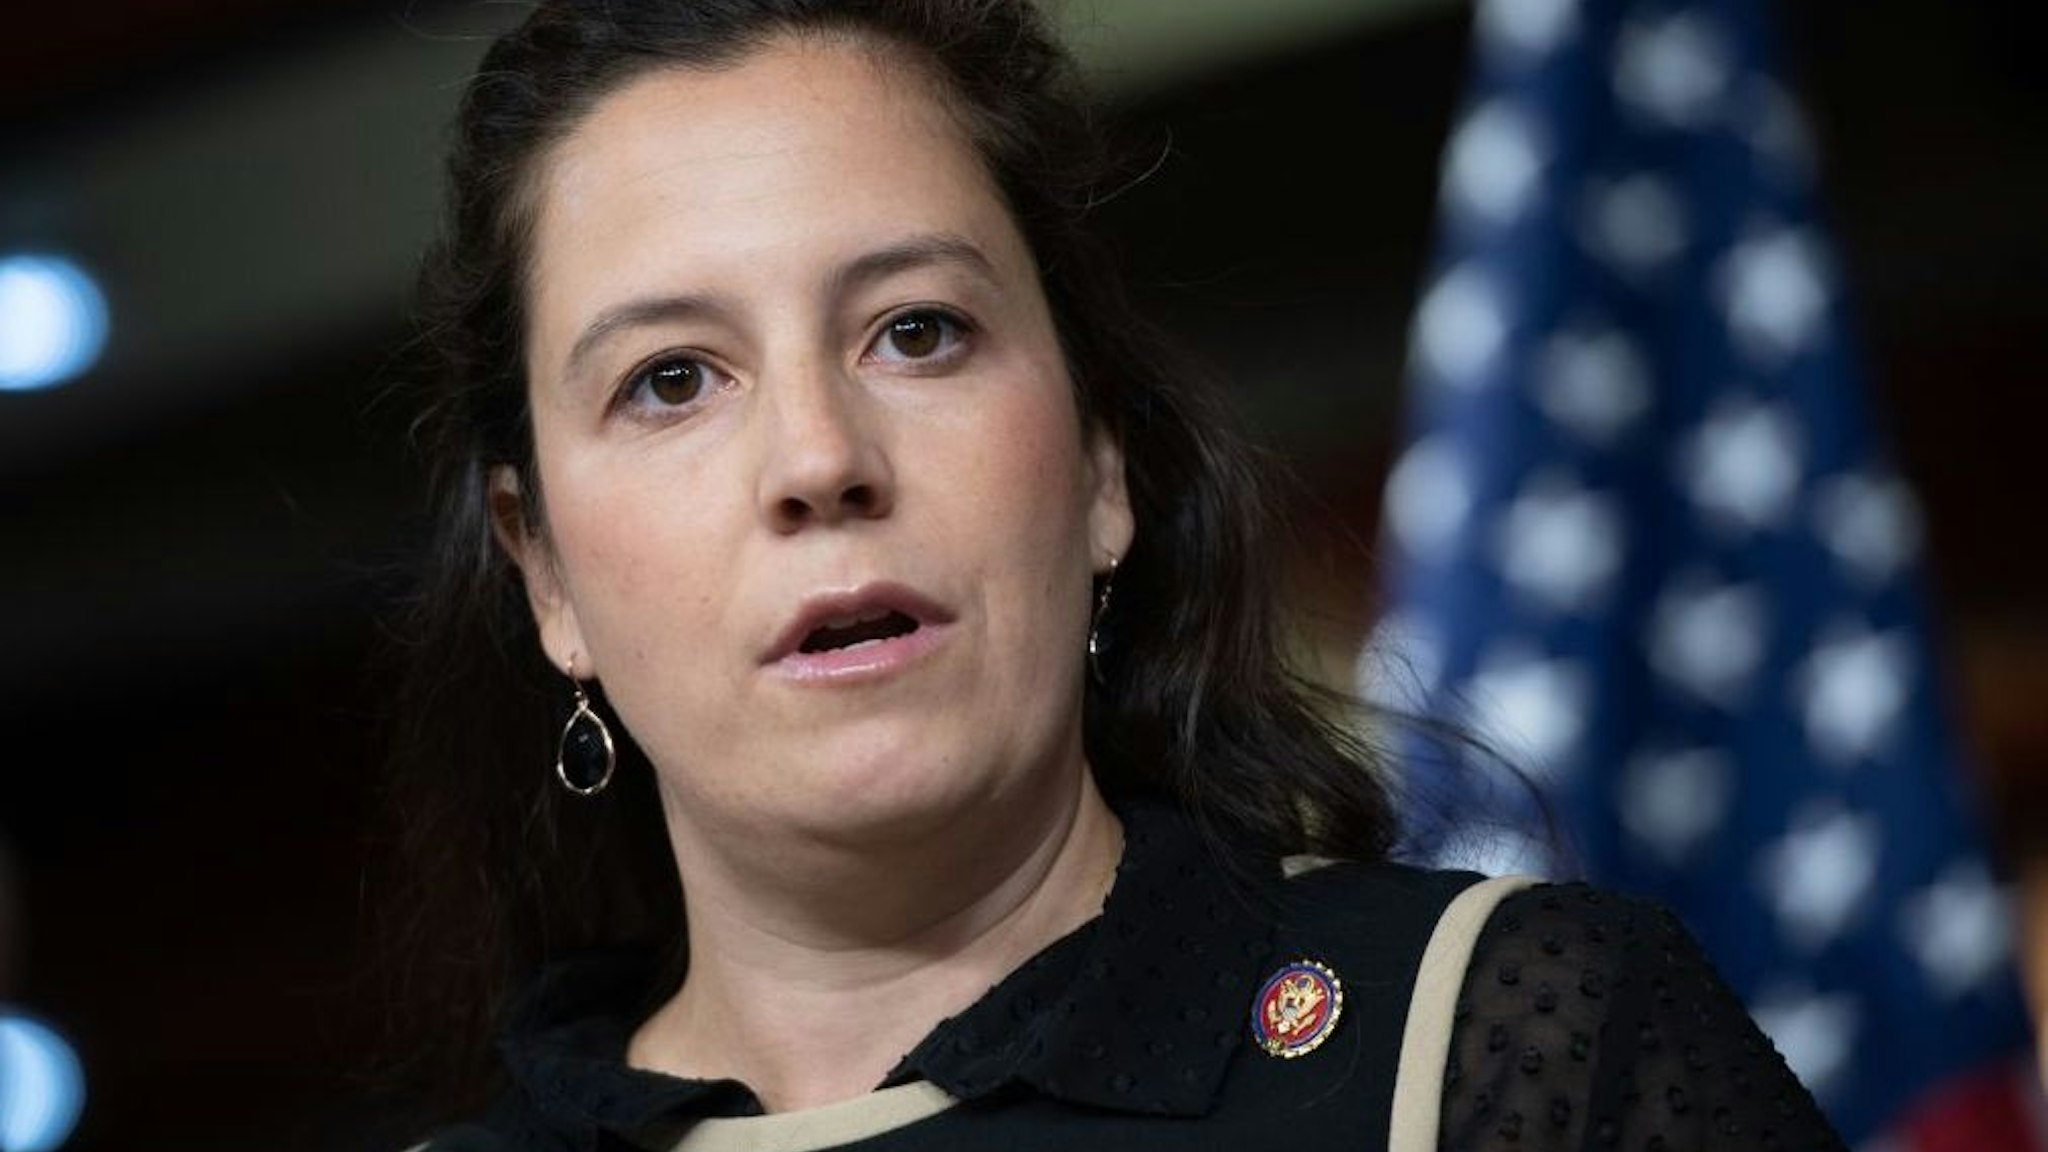 US Representative Elise Stefanik, Republican of New York, speaks during a press conference on Capitol Hill in Washington, DC, October 22, 2019.